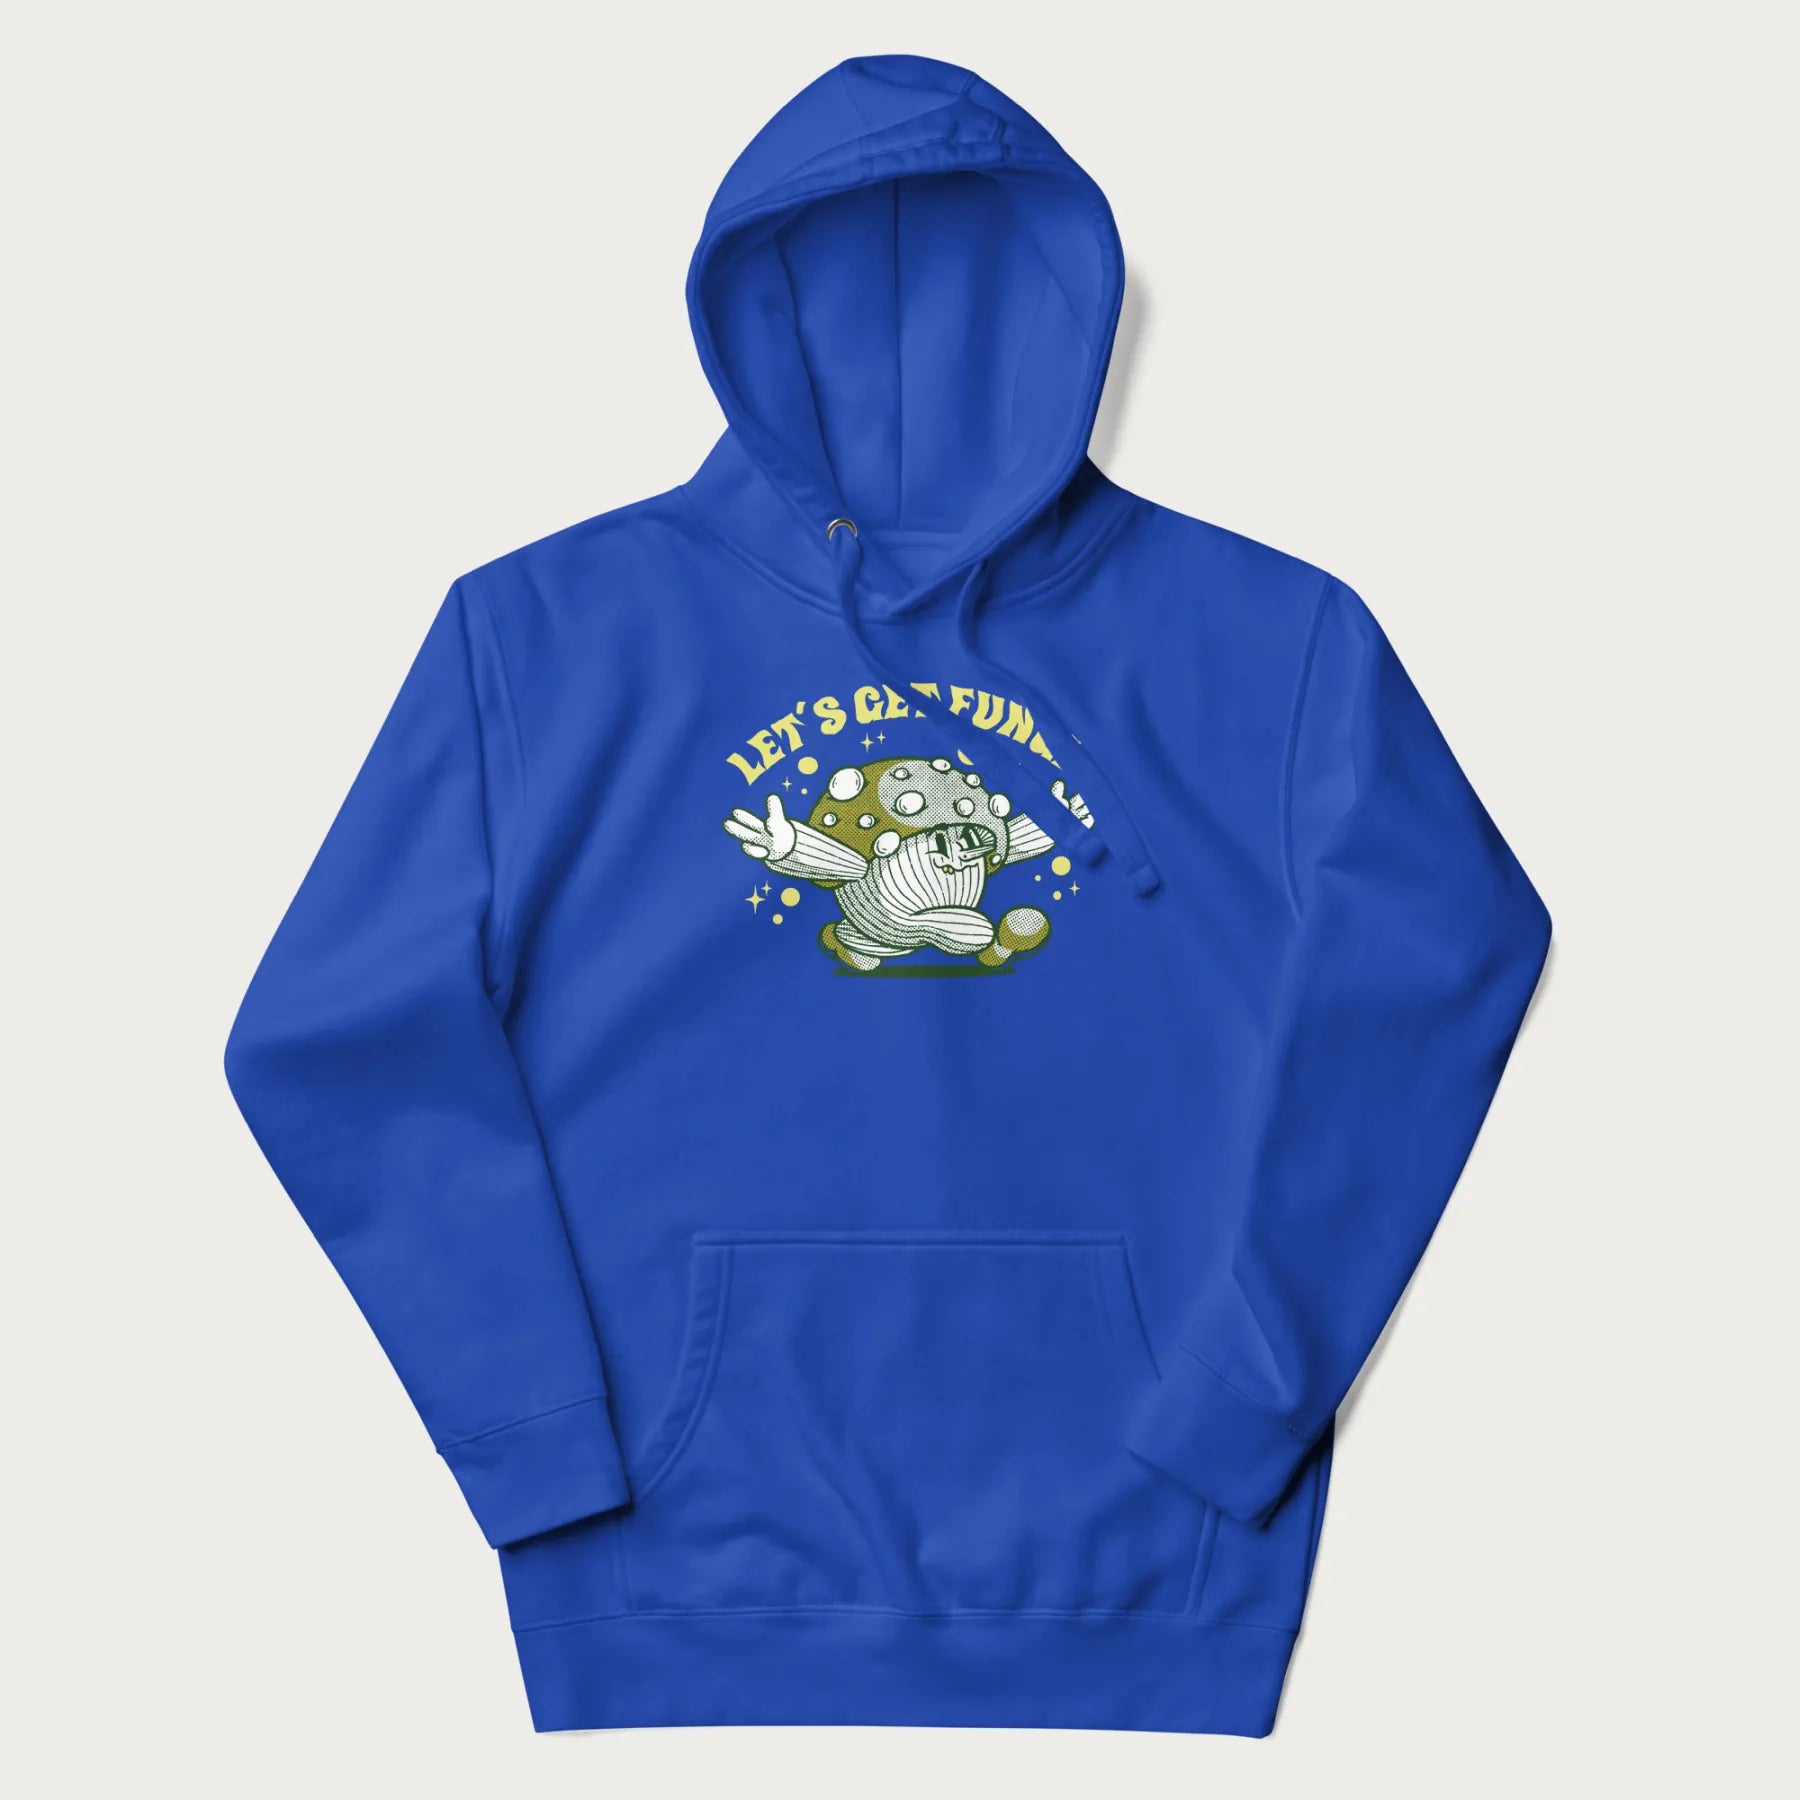 Royal blue hoodie with a retro-inspired graphic of a mushroom mascot character and the text 'Let's Get Fungi'.